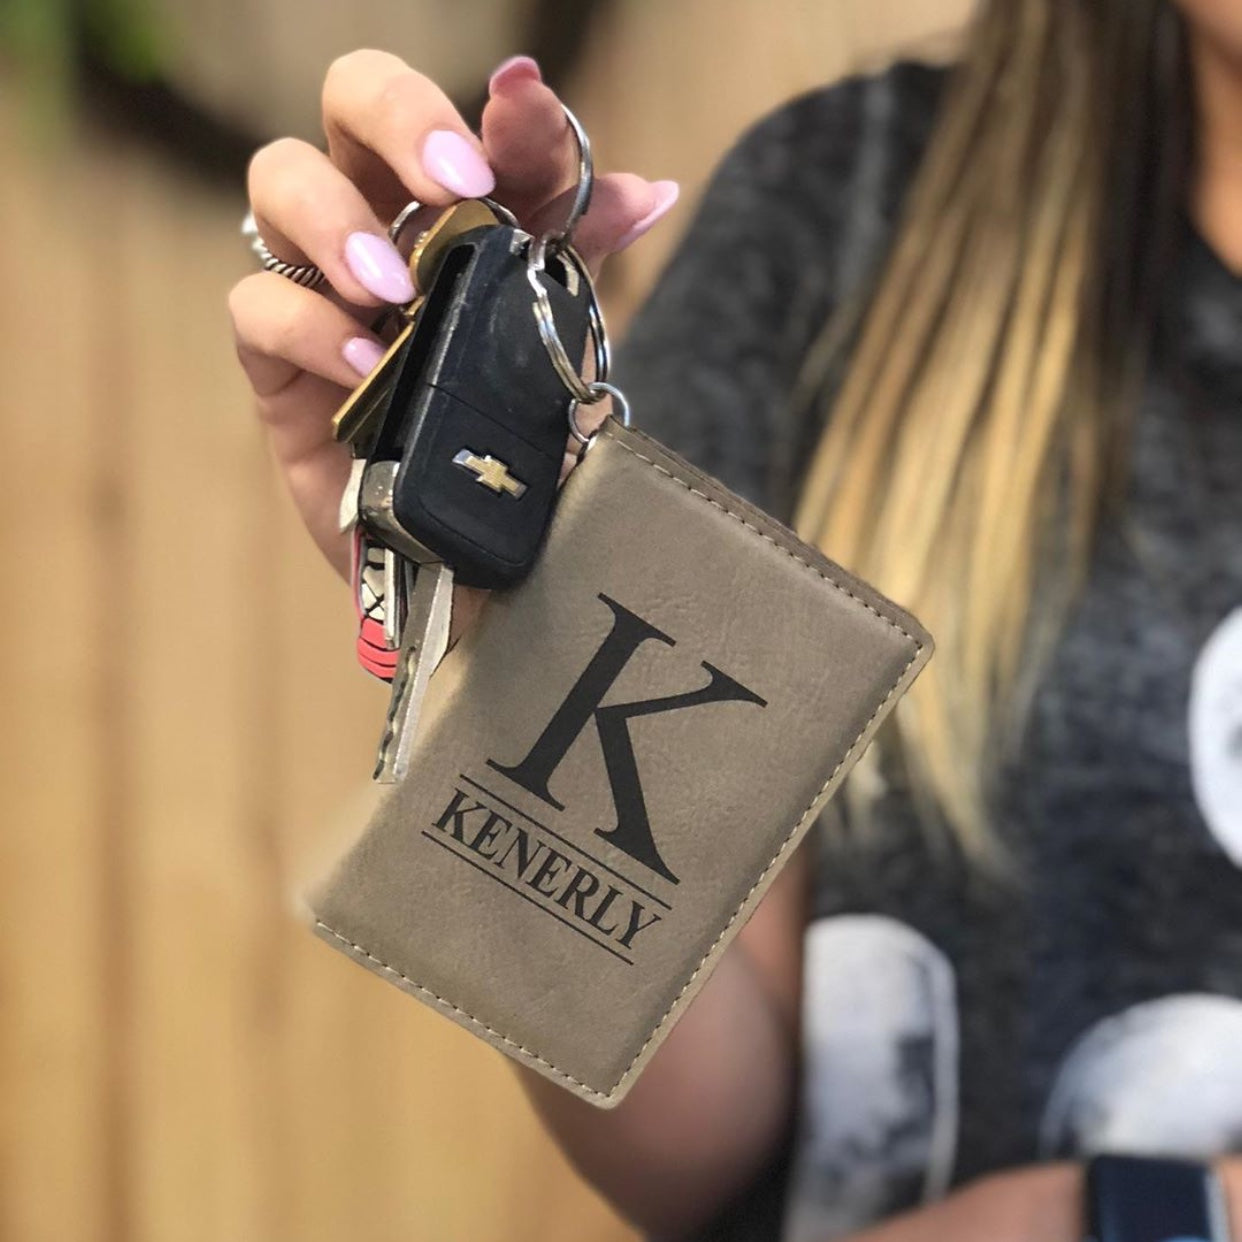 Personalized Keychain Wallet - Style & Function Combined